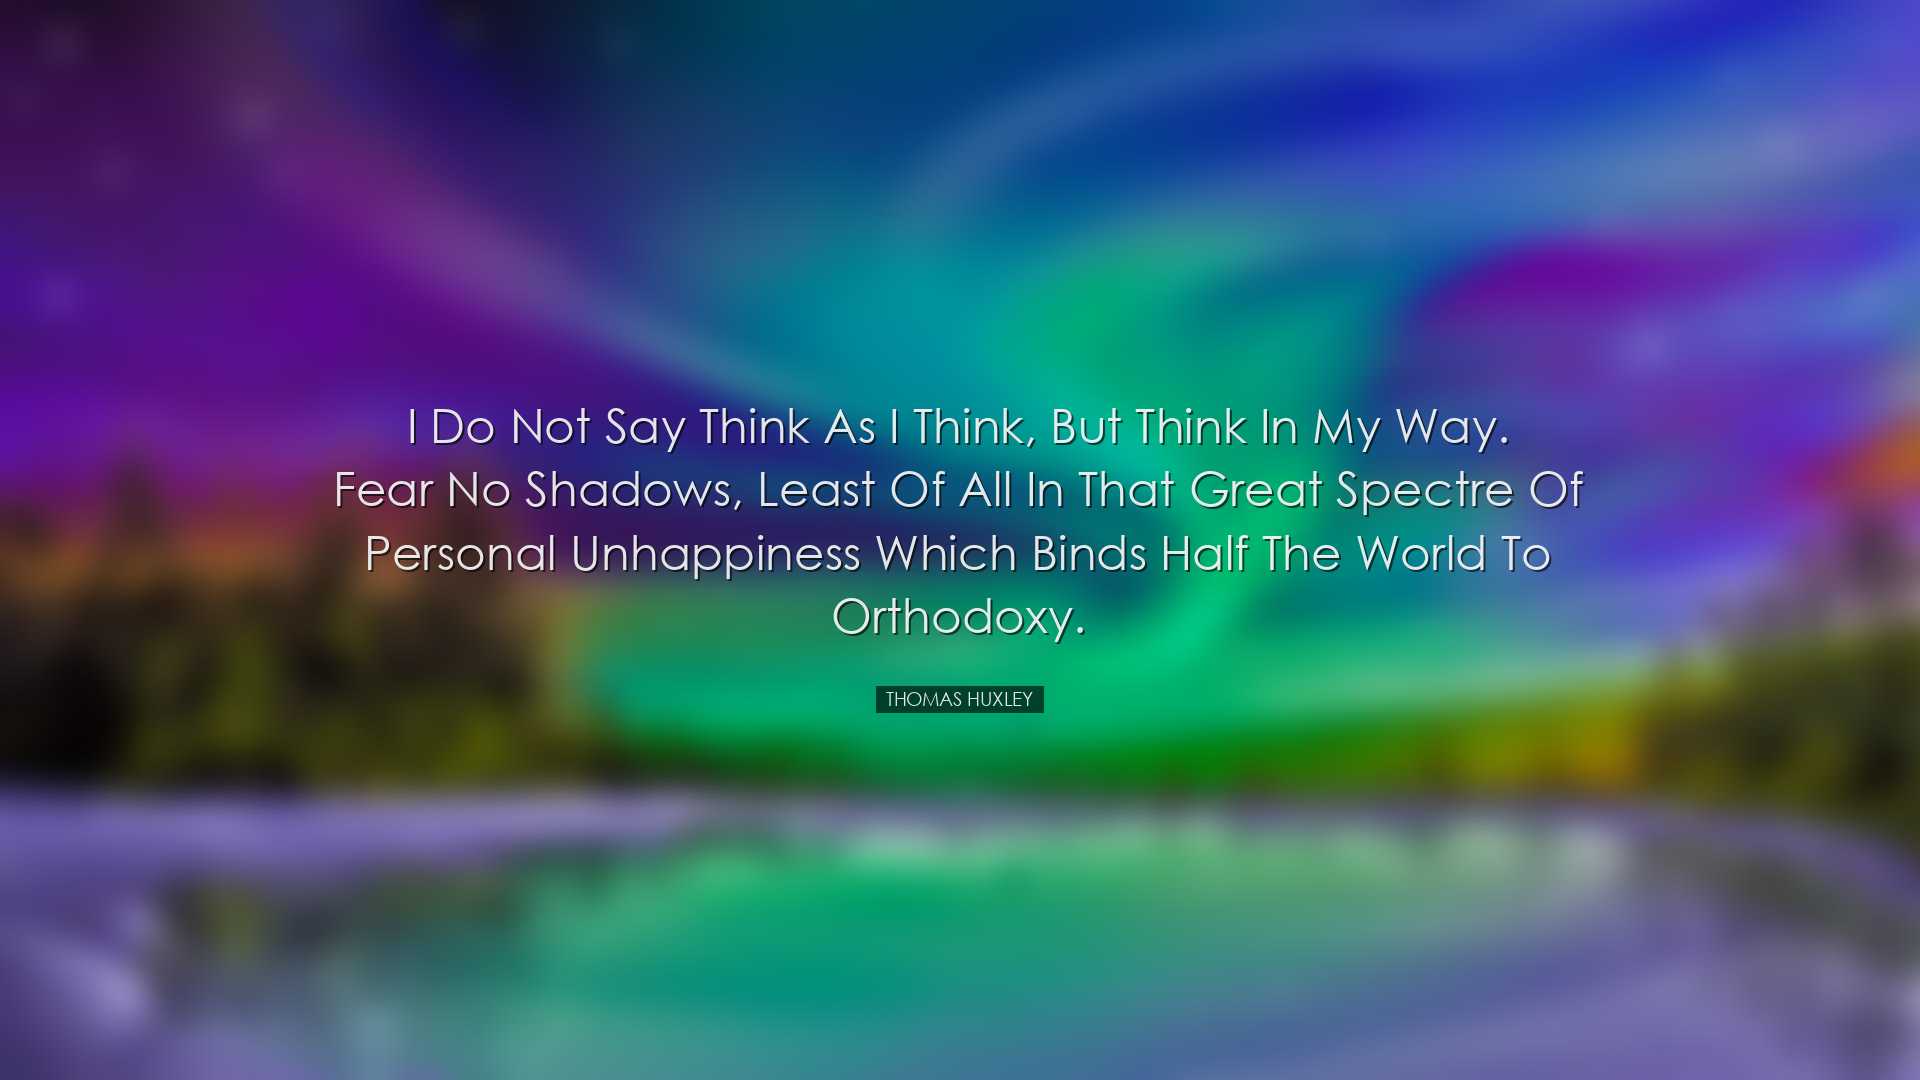 I do not say think as I think, but think in my way. Fear no shadow